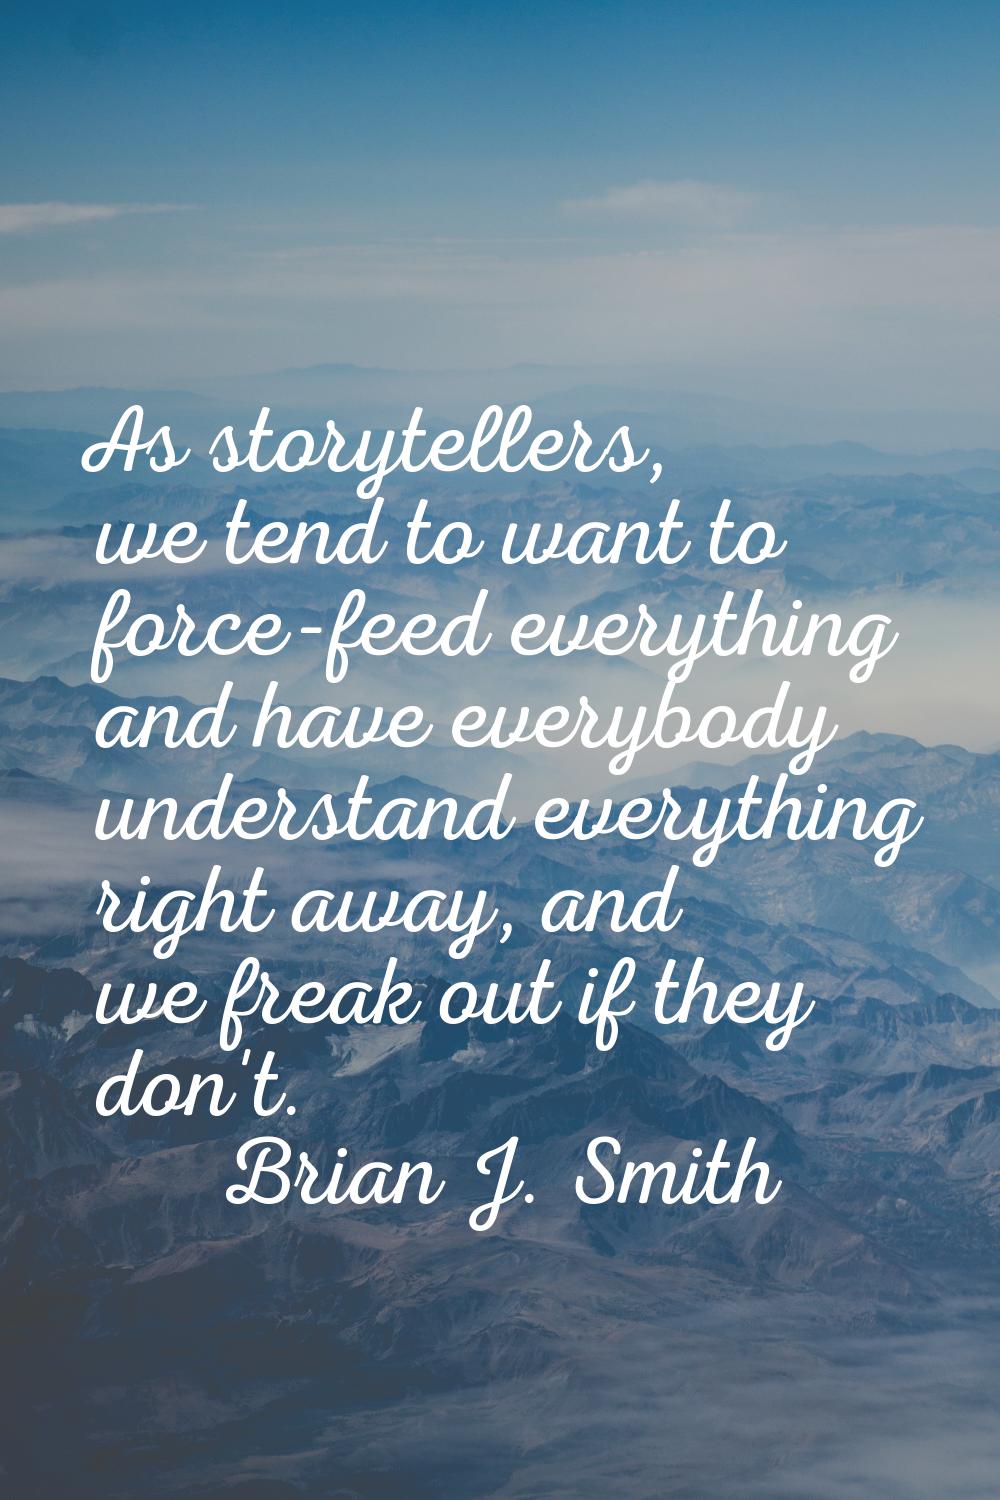 As storytellers, we tend to want to force-feed everything and have everybody understand everything 